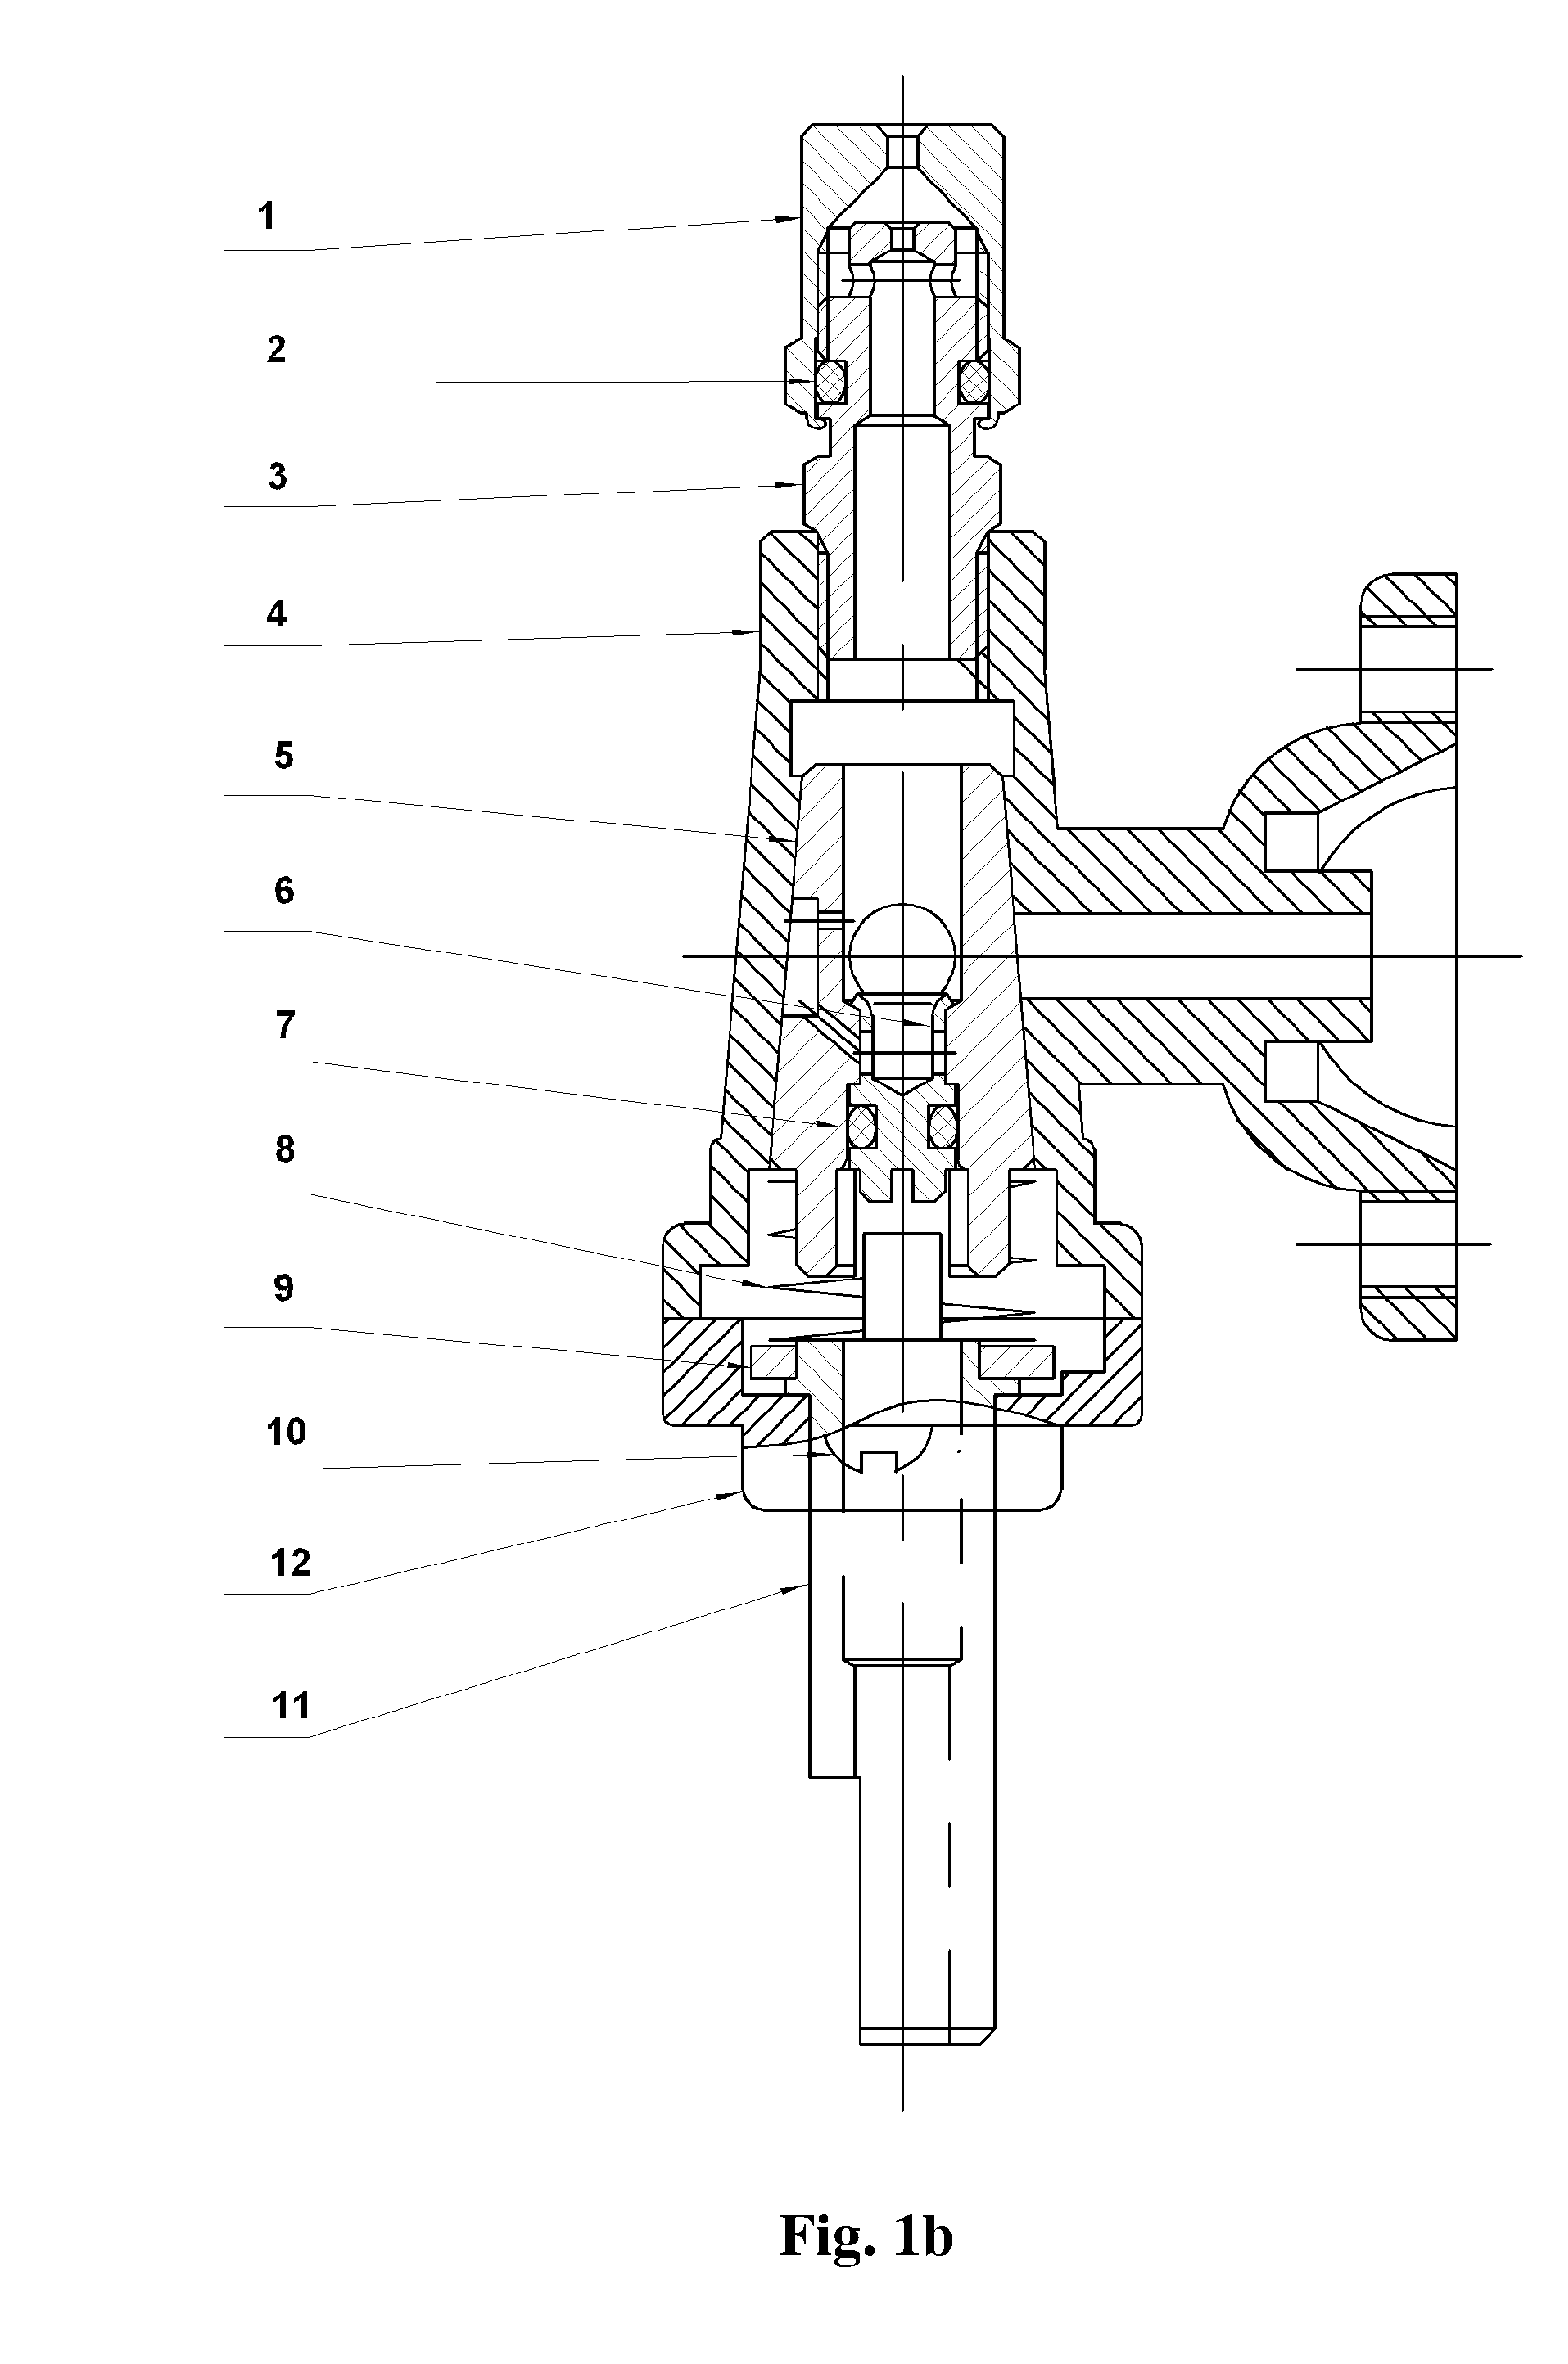 Manual gas valve with natural/lp gas conversion capability